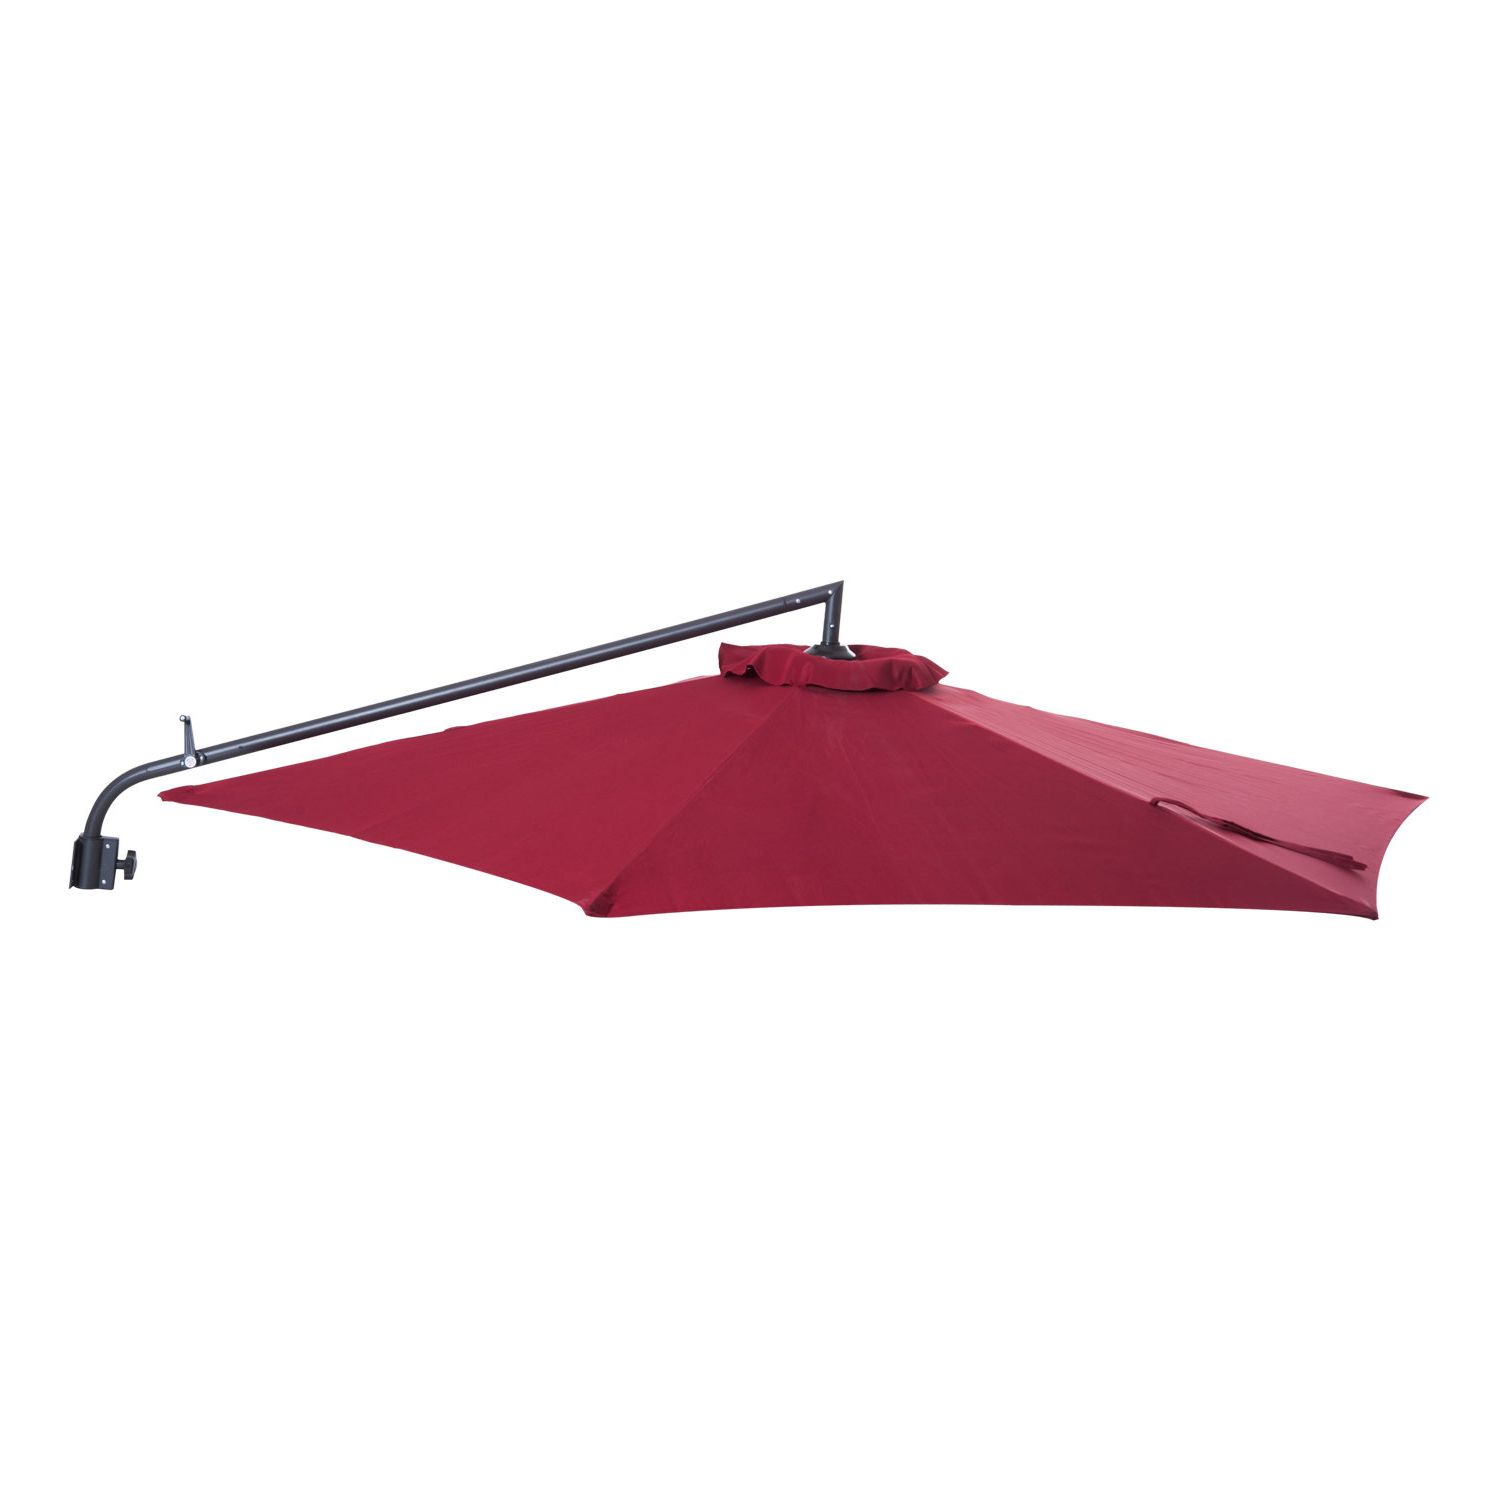 Nasiba Square Cantilever Sunbrella Umbrellas Pertaining To Best And Newest Buster  (View 20 of 20)